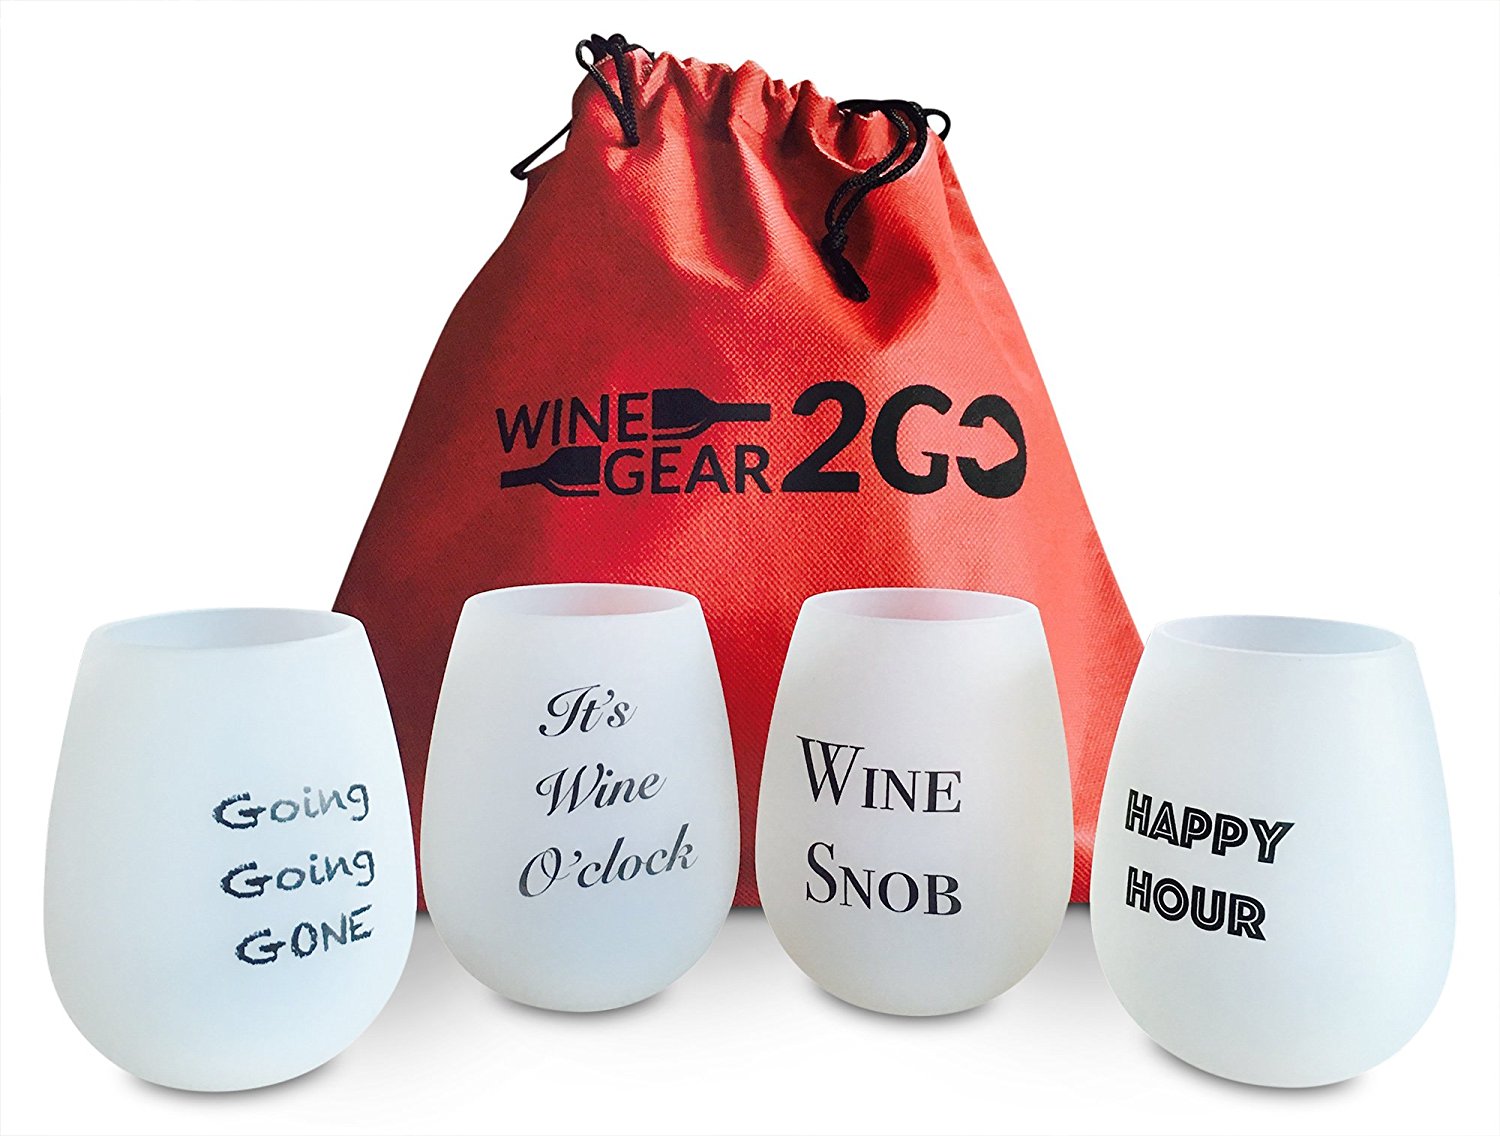 These are shatterproof wine glasses and make a great gift this holiday season